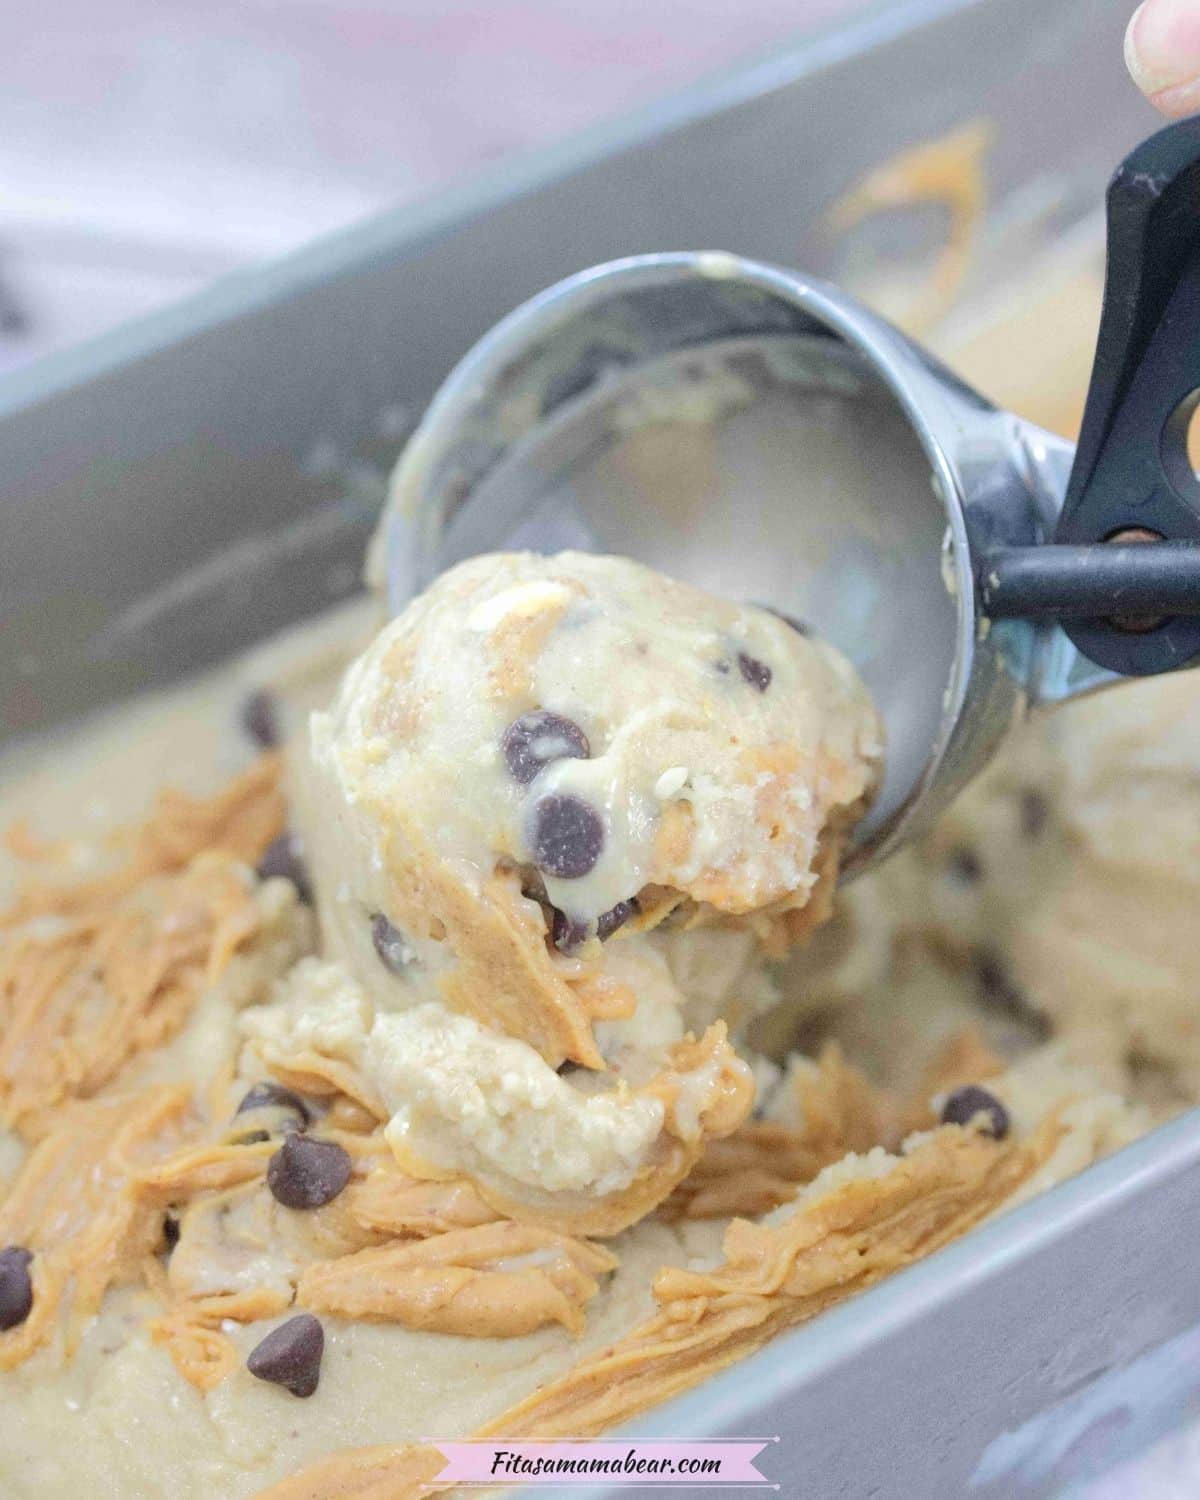 Close up of an ice cream scoop scooping peanut butter chocolate chip ice cream.
